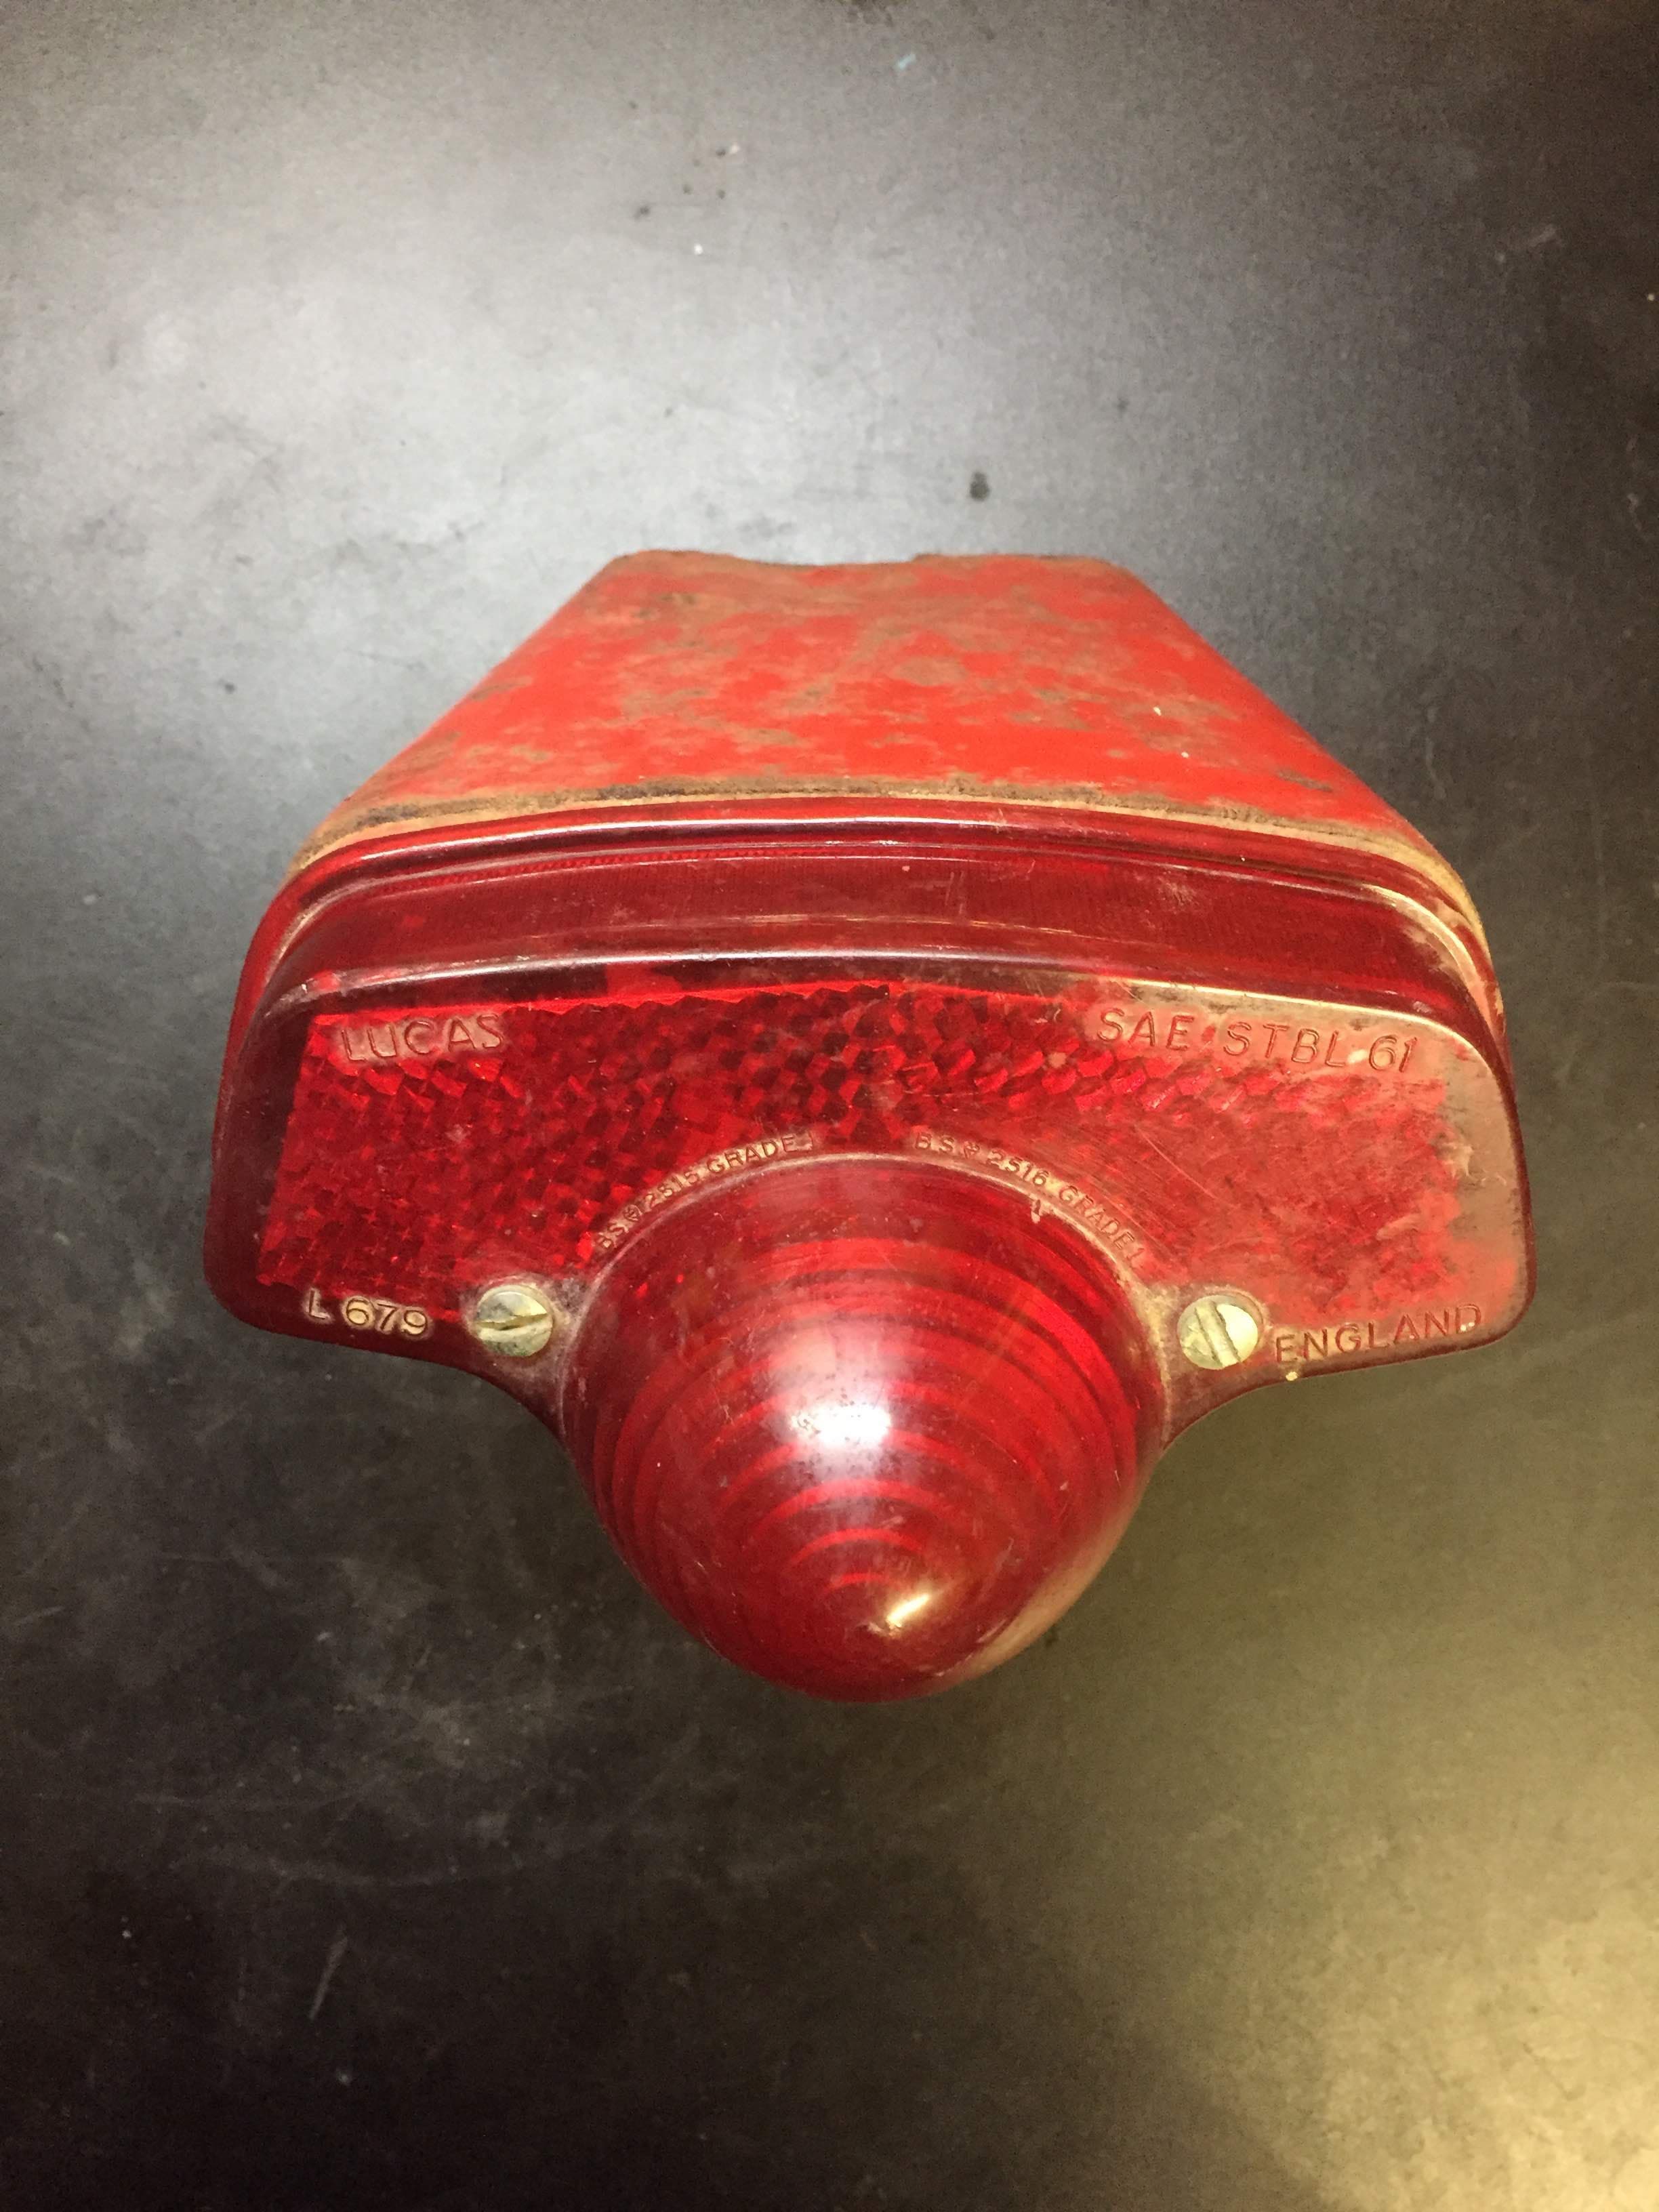 Puch Taillight 364.2.55.815.2